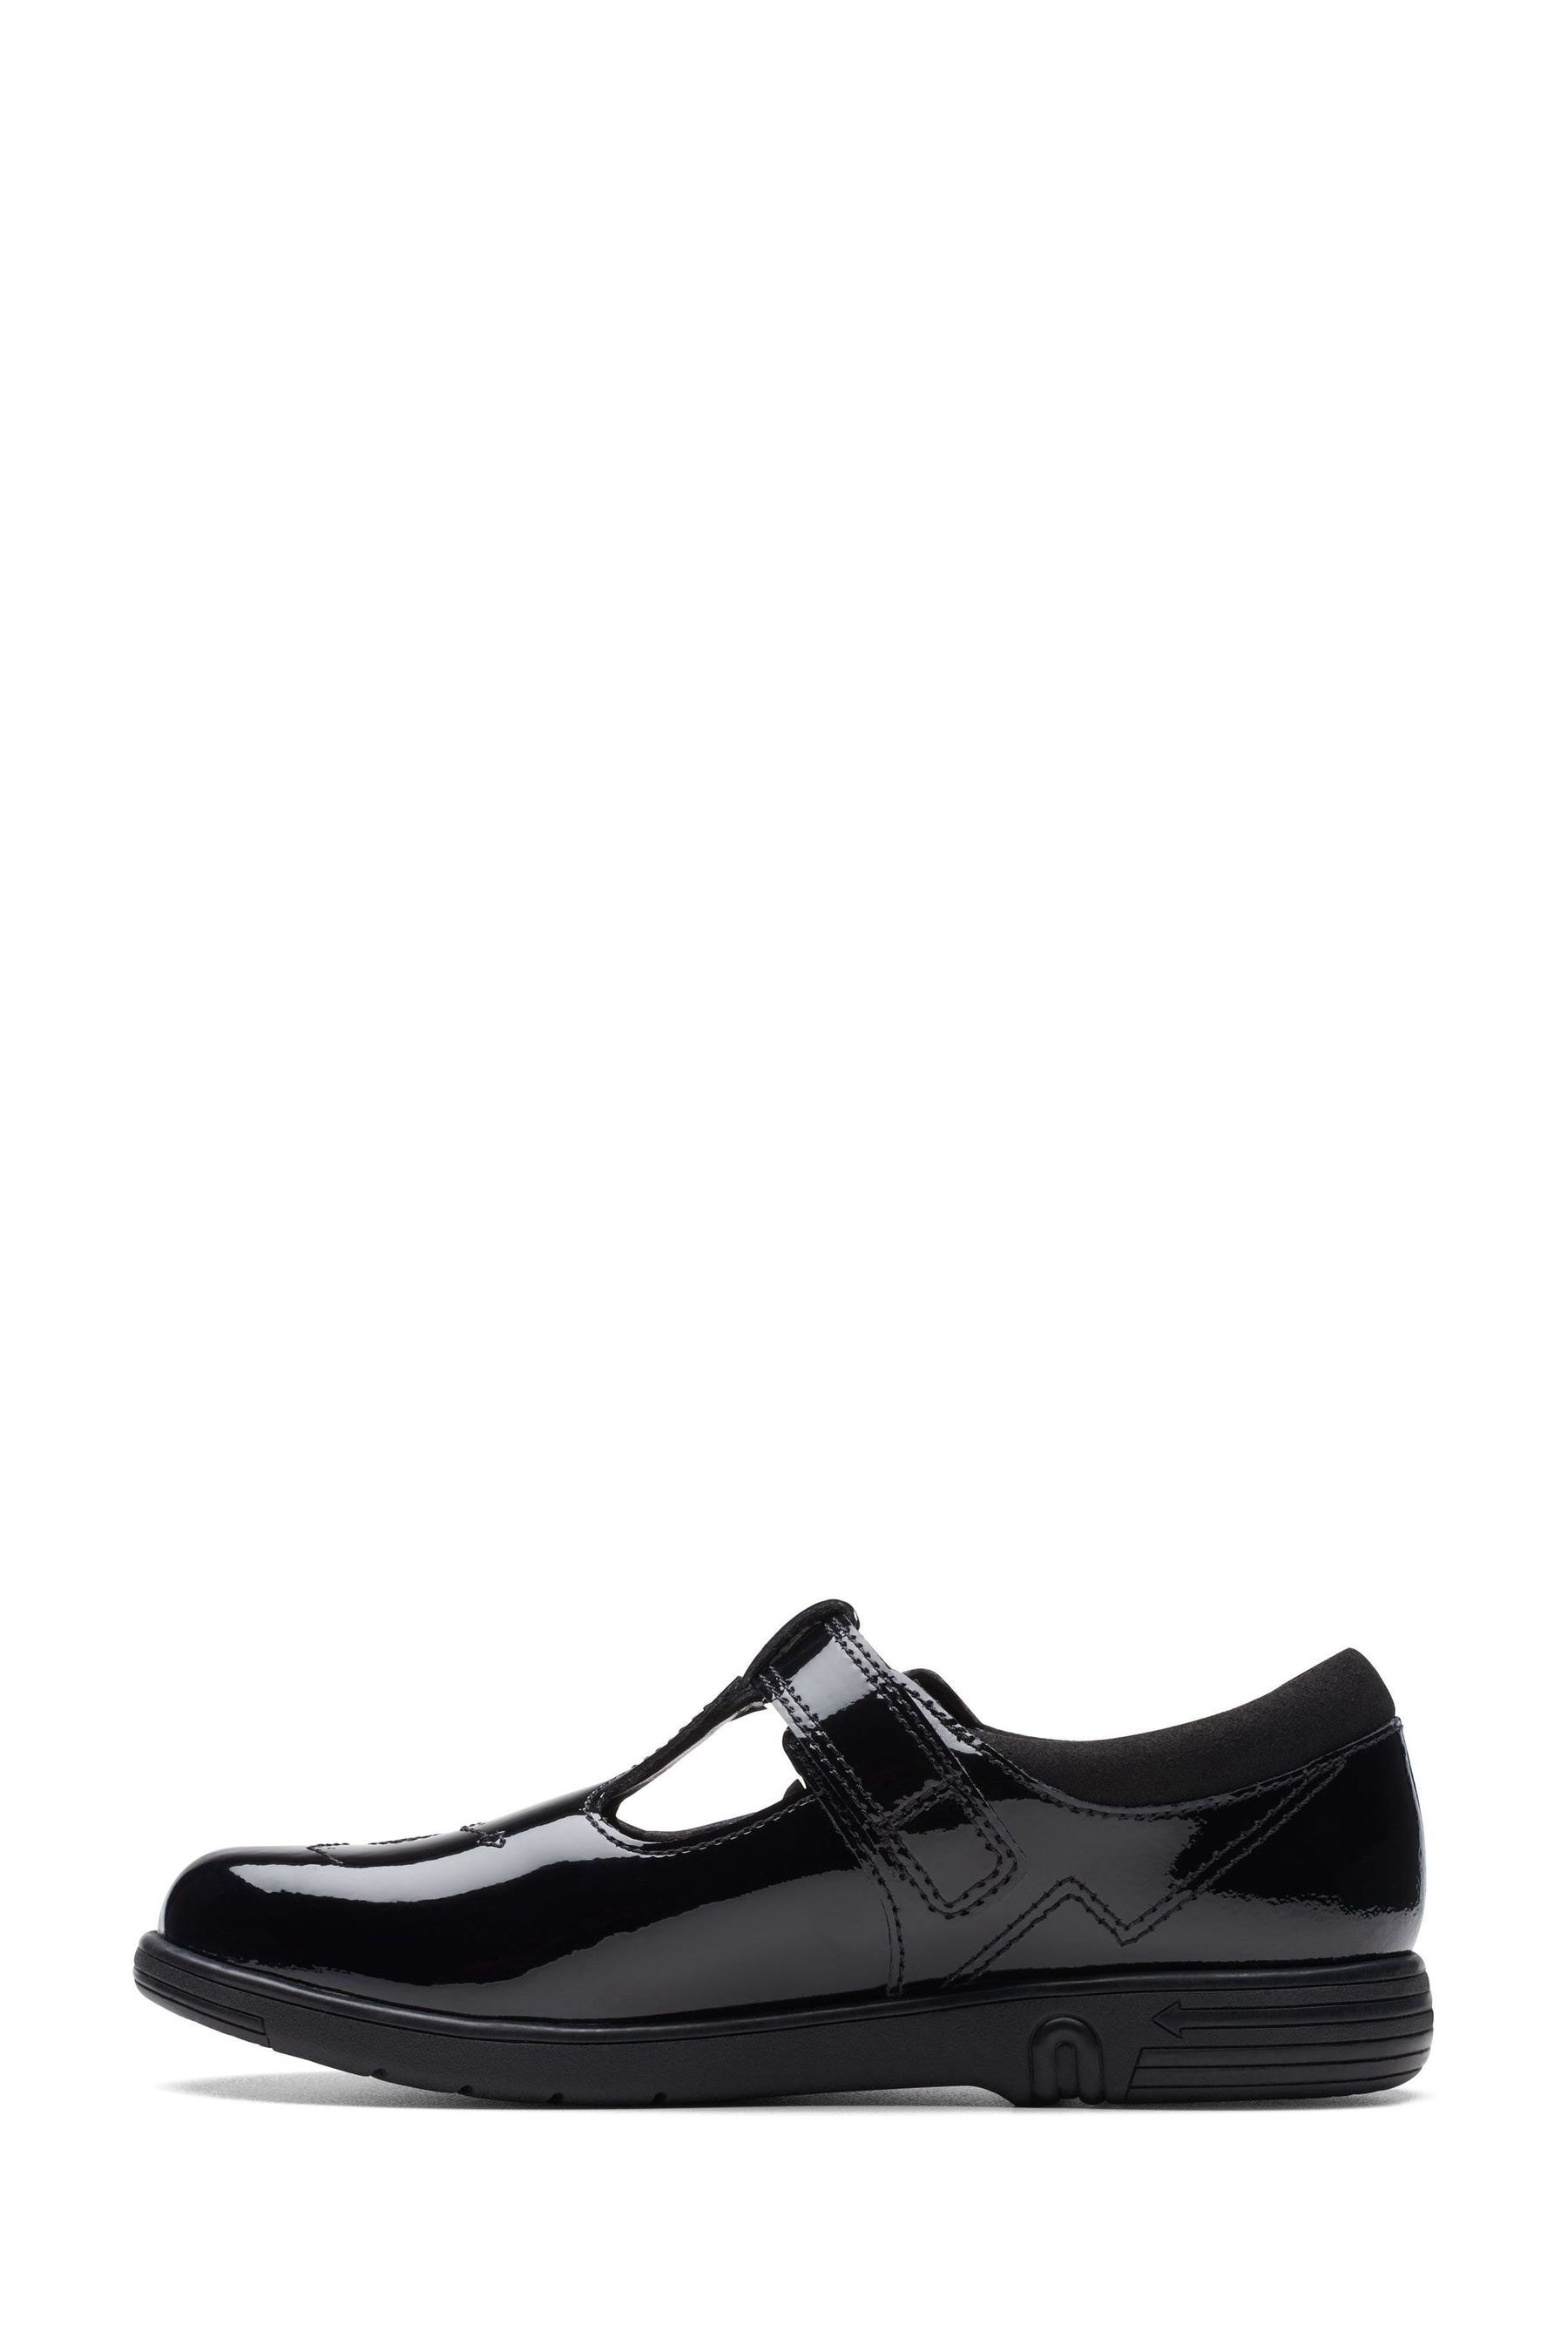 Buy Clarks Black Patent Multi Fit Jazzy Tap Shoes from the Next UK ...